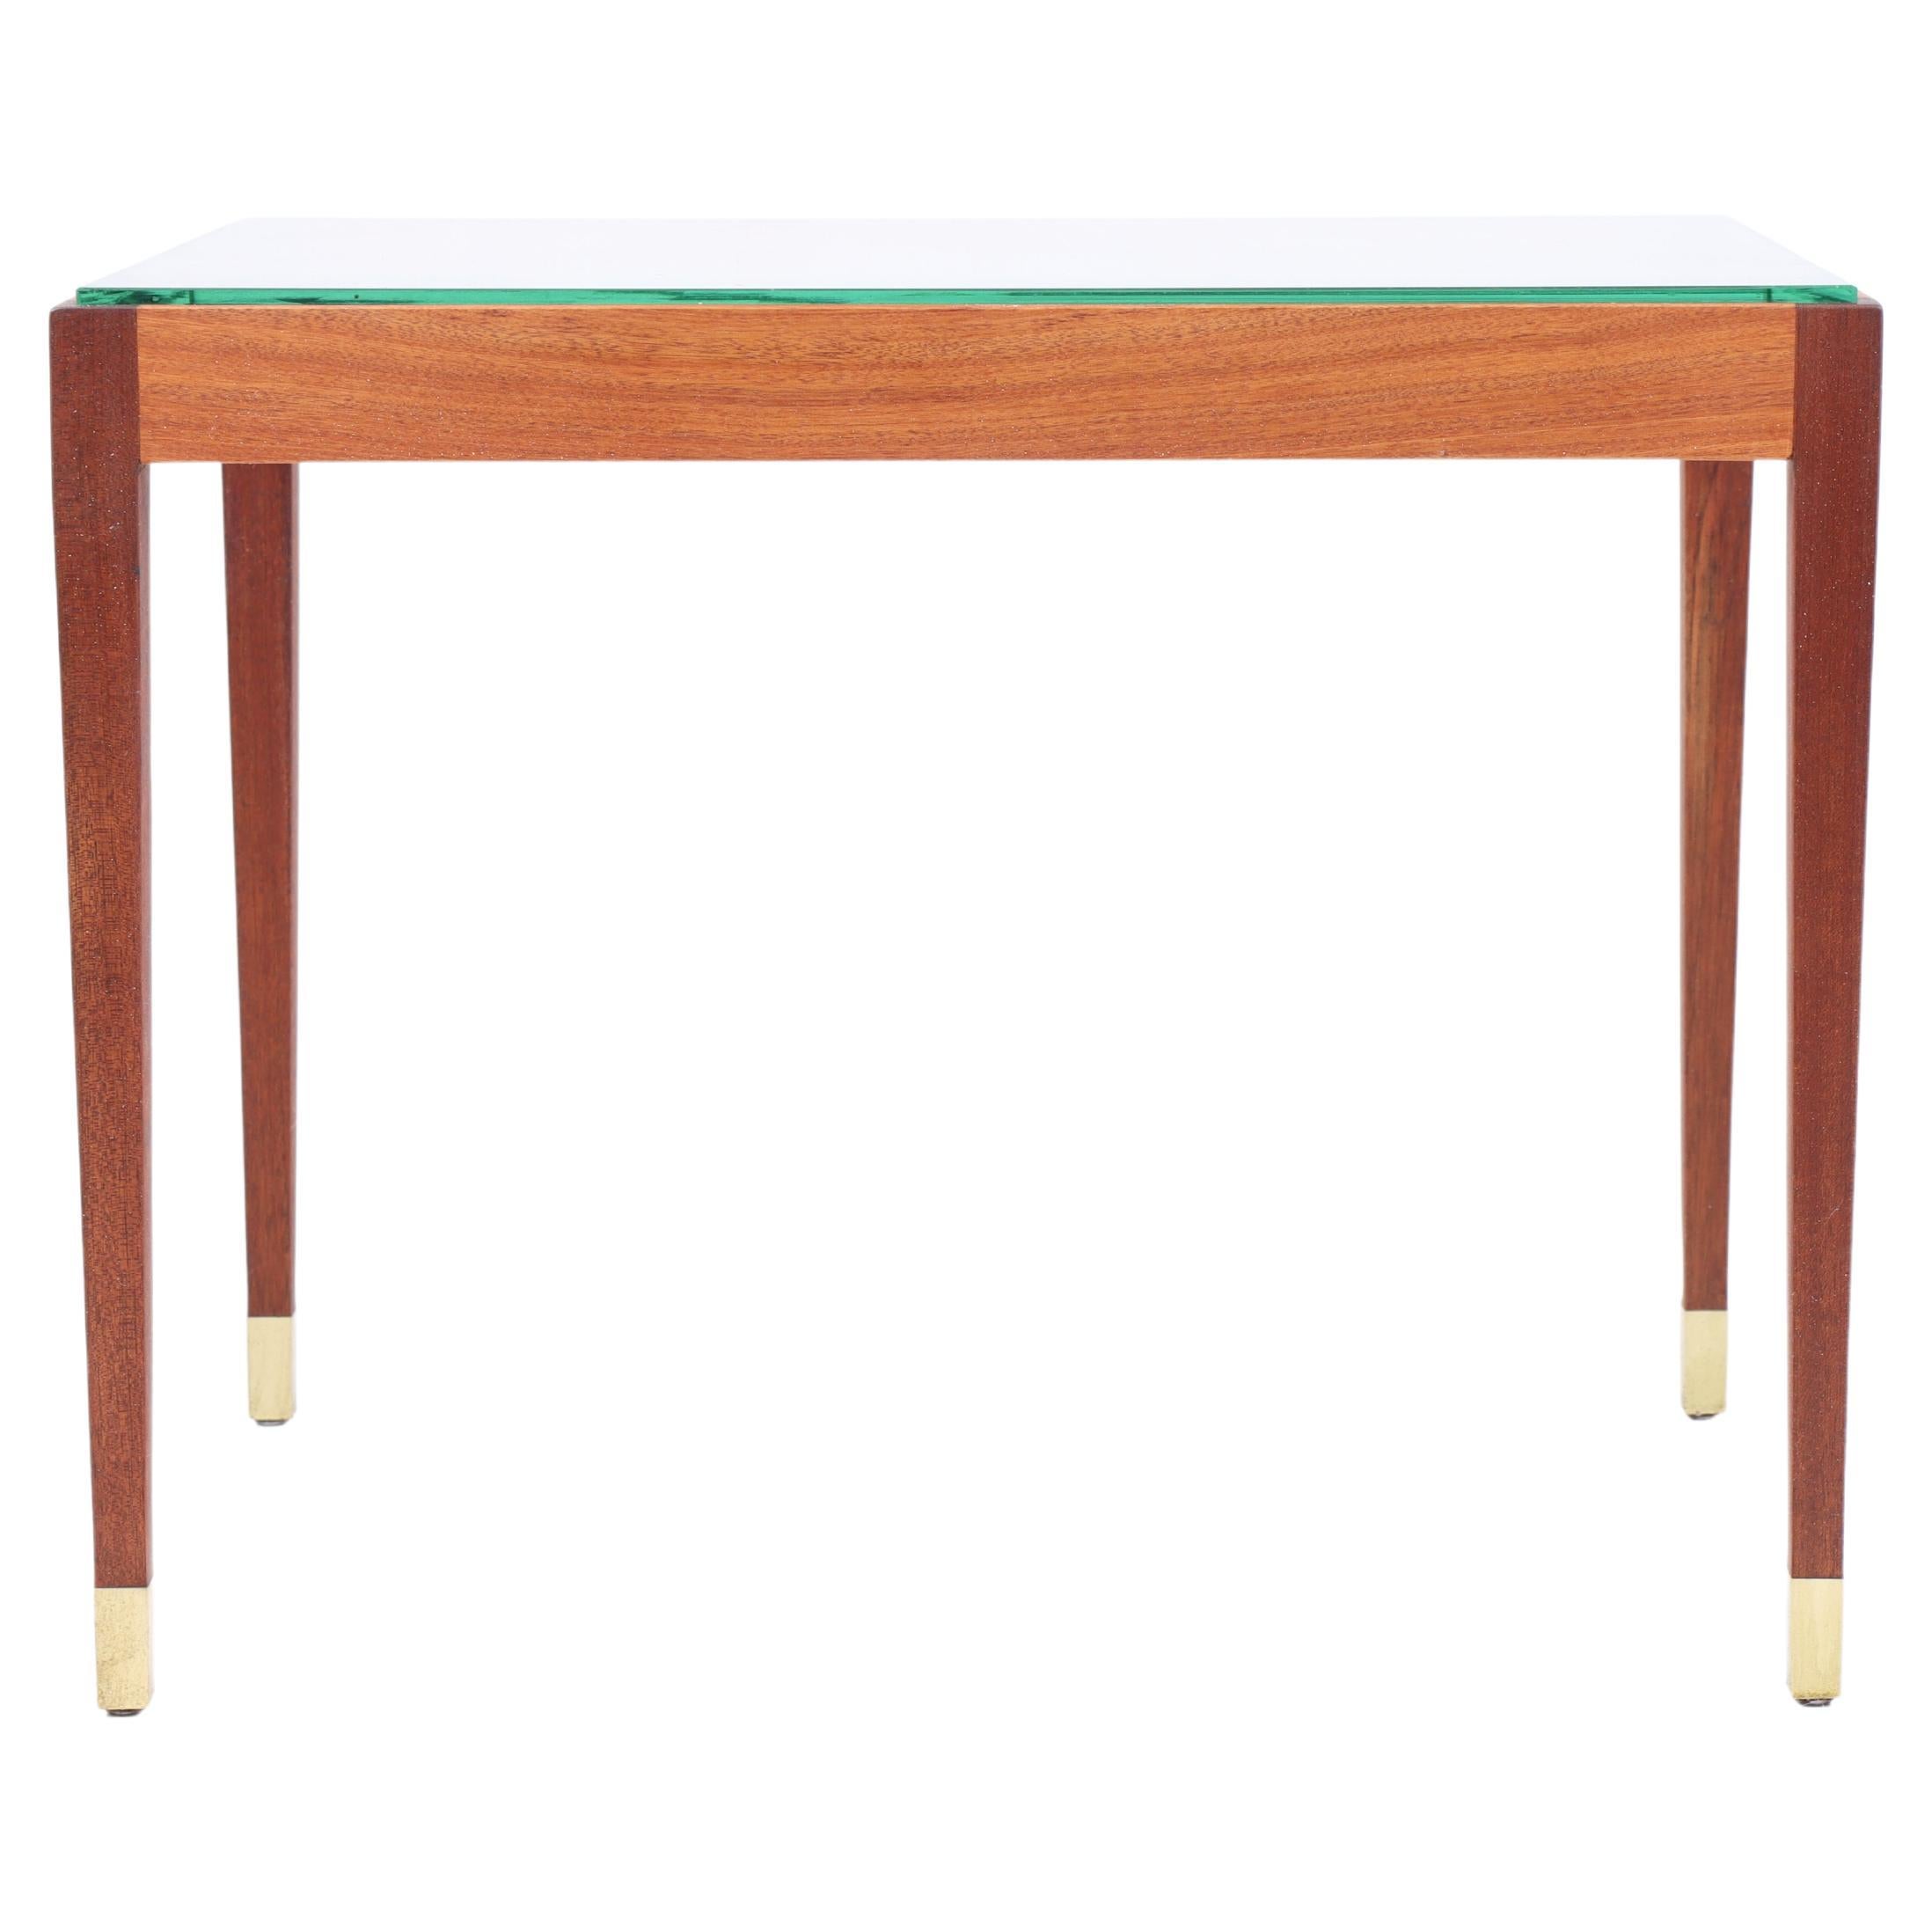 Midcentury Low Table in Glass and Teak, Made in Denmark 1960s For Sale